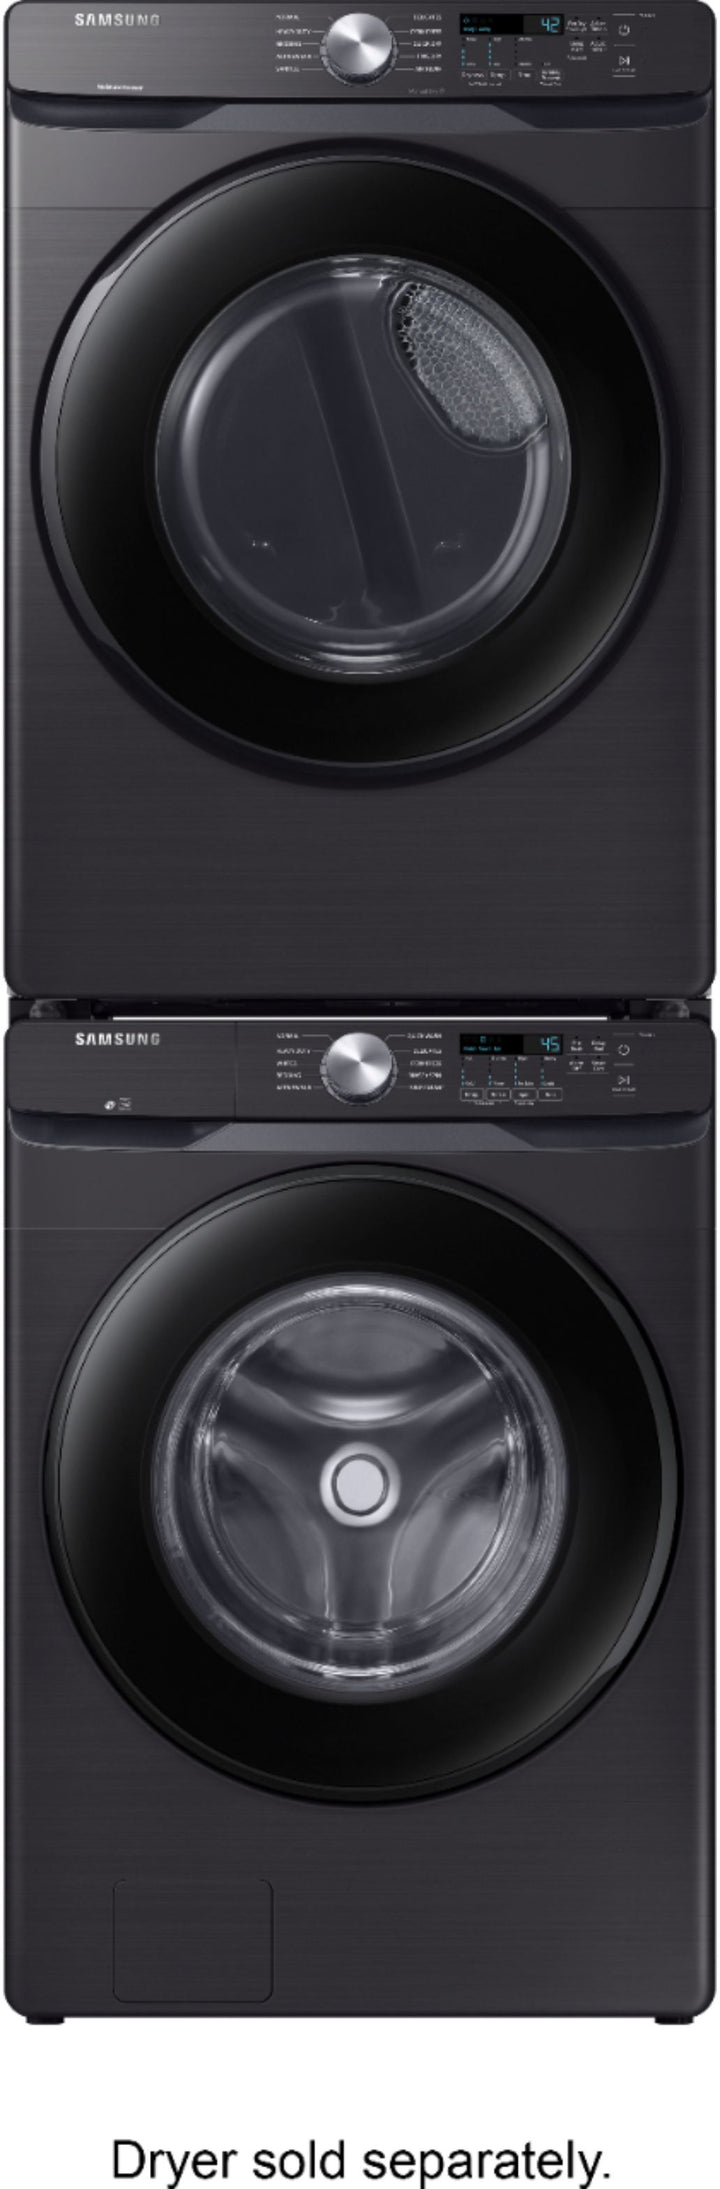 Samsung - 4.5 Cu. Ft. High Efficiency Stackable Front Load Washer with Steam and Vibration Reduction Technology+ - Black Stainless Steel_7